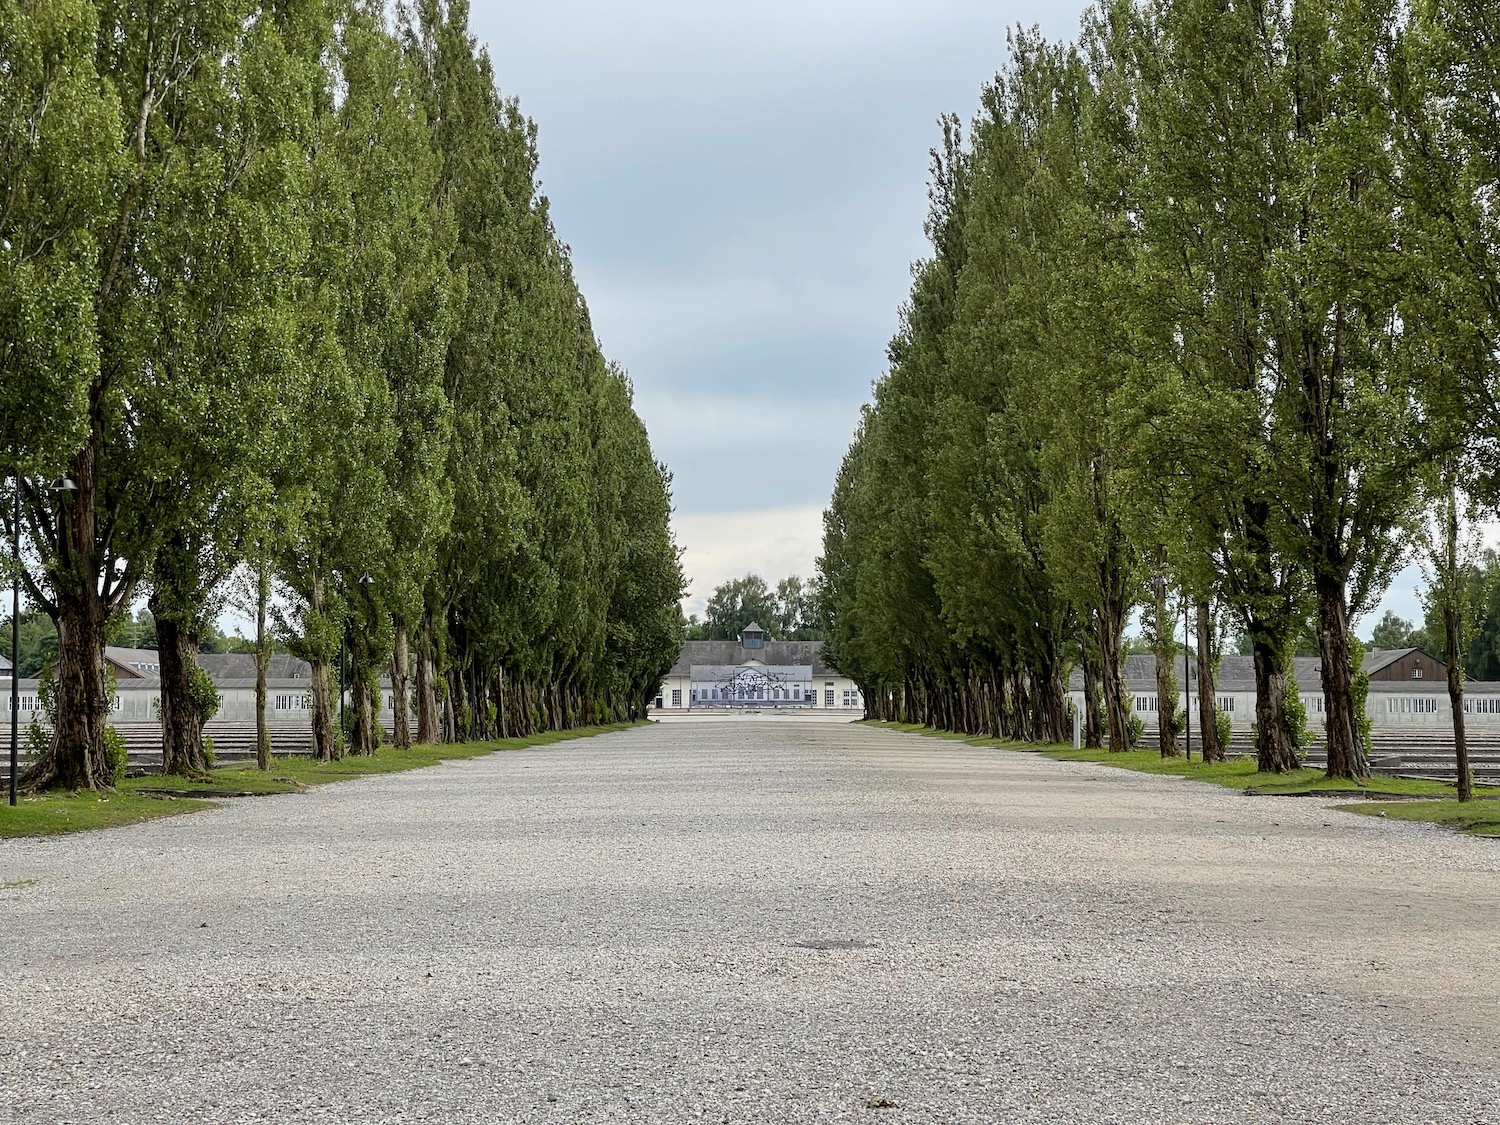 a road with trees lined up in the middle